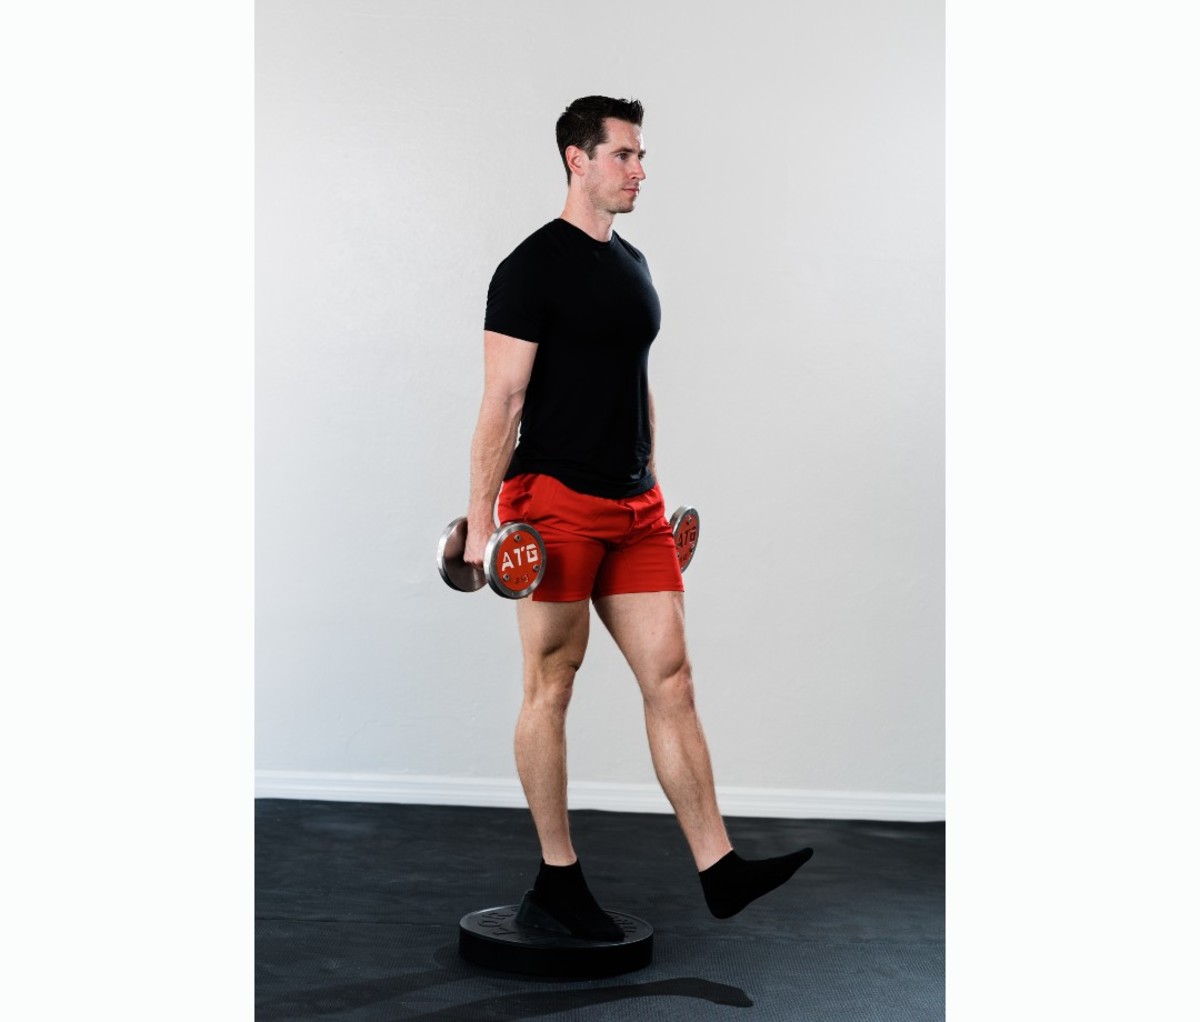 Caucasian man in black T-shirt and red shorts doing Poliquin stepup